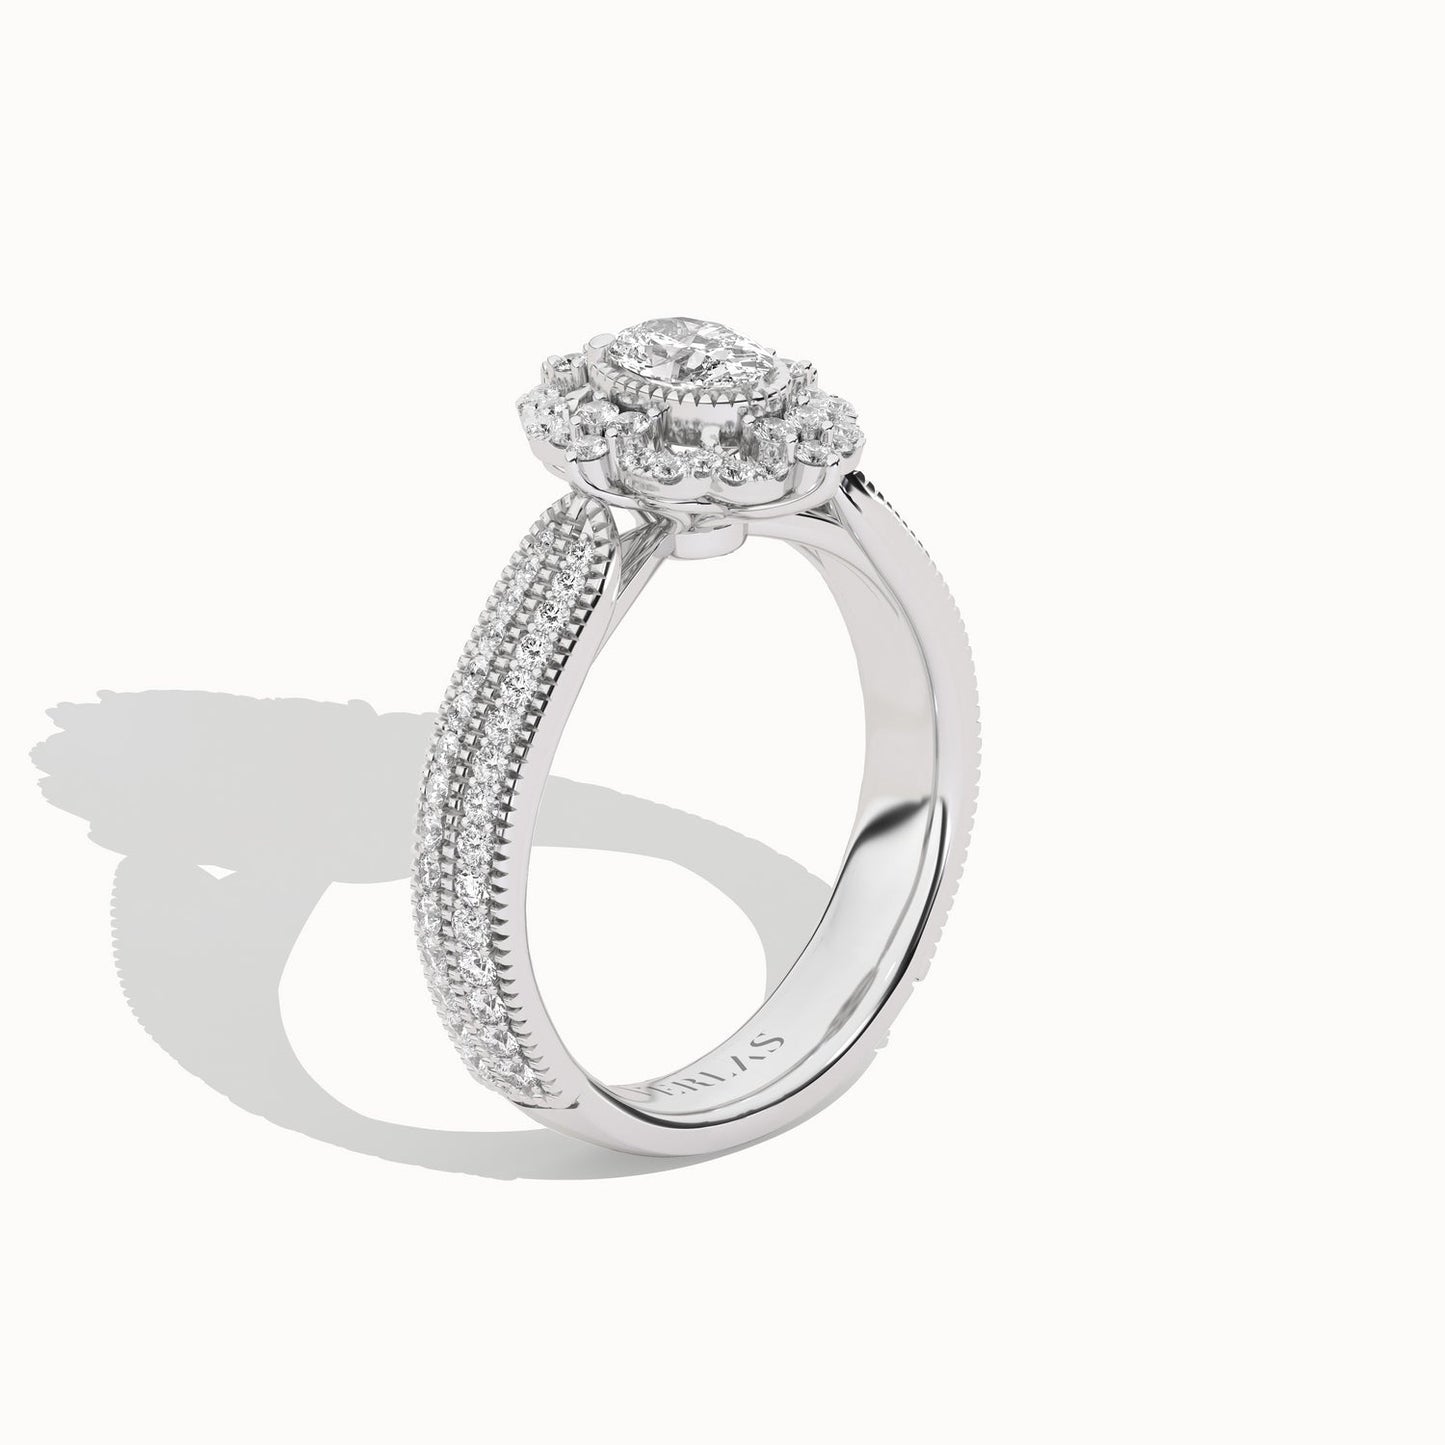 Ornate Ellipse Ring_Product Angle_1Ct - 4